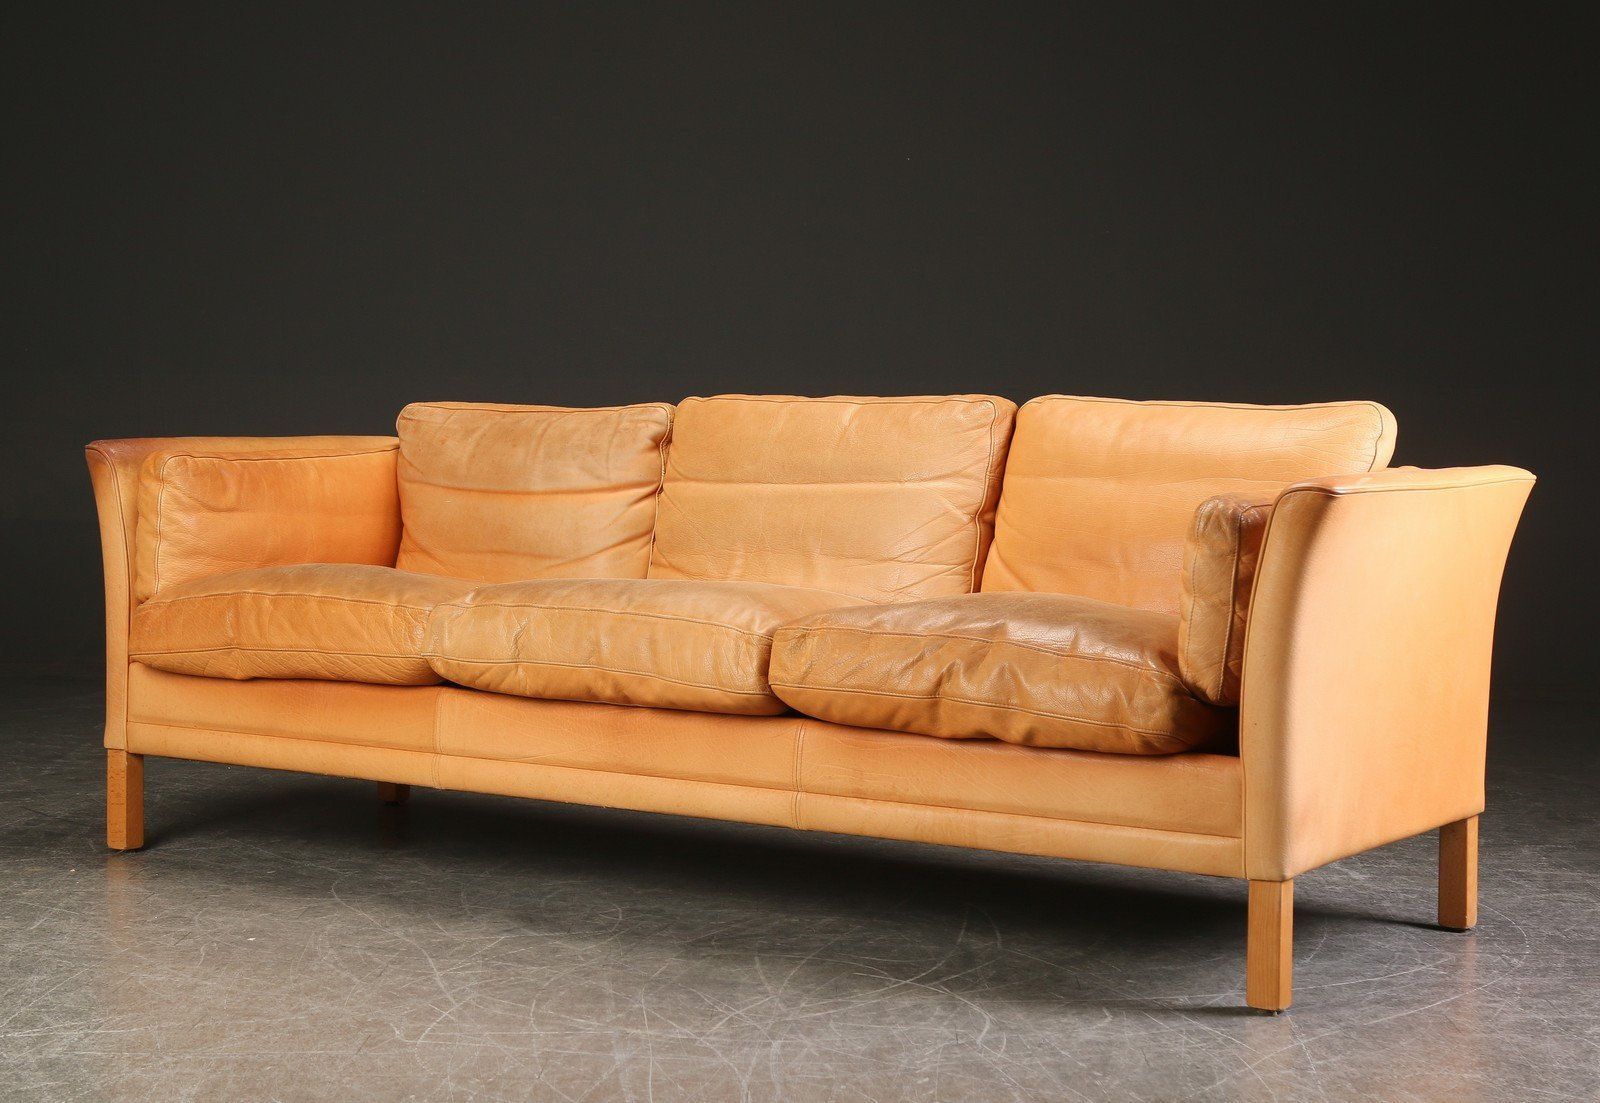 Lovely 3 Seater Vintage Leather Sofamogens Hansen, Danish Mid With Regard To Mid Century 3 Seat Couches (Gallery 20 of 20)